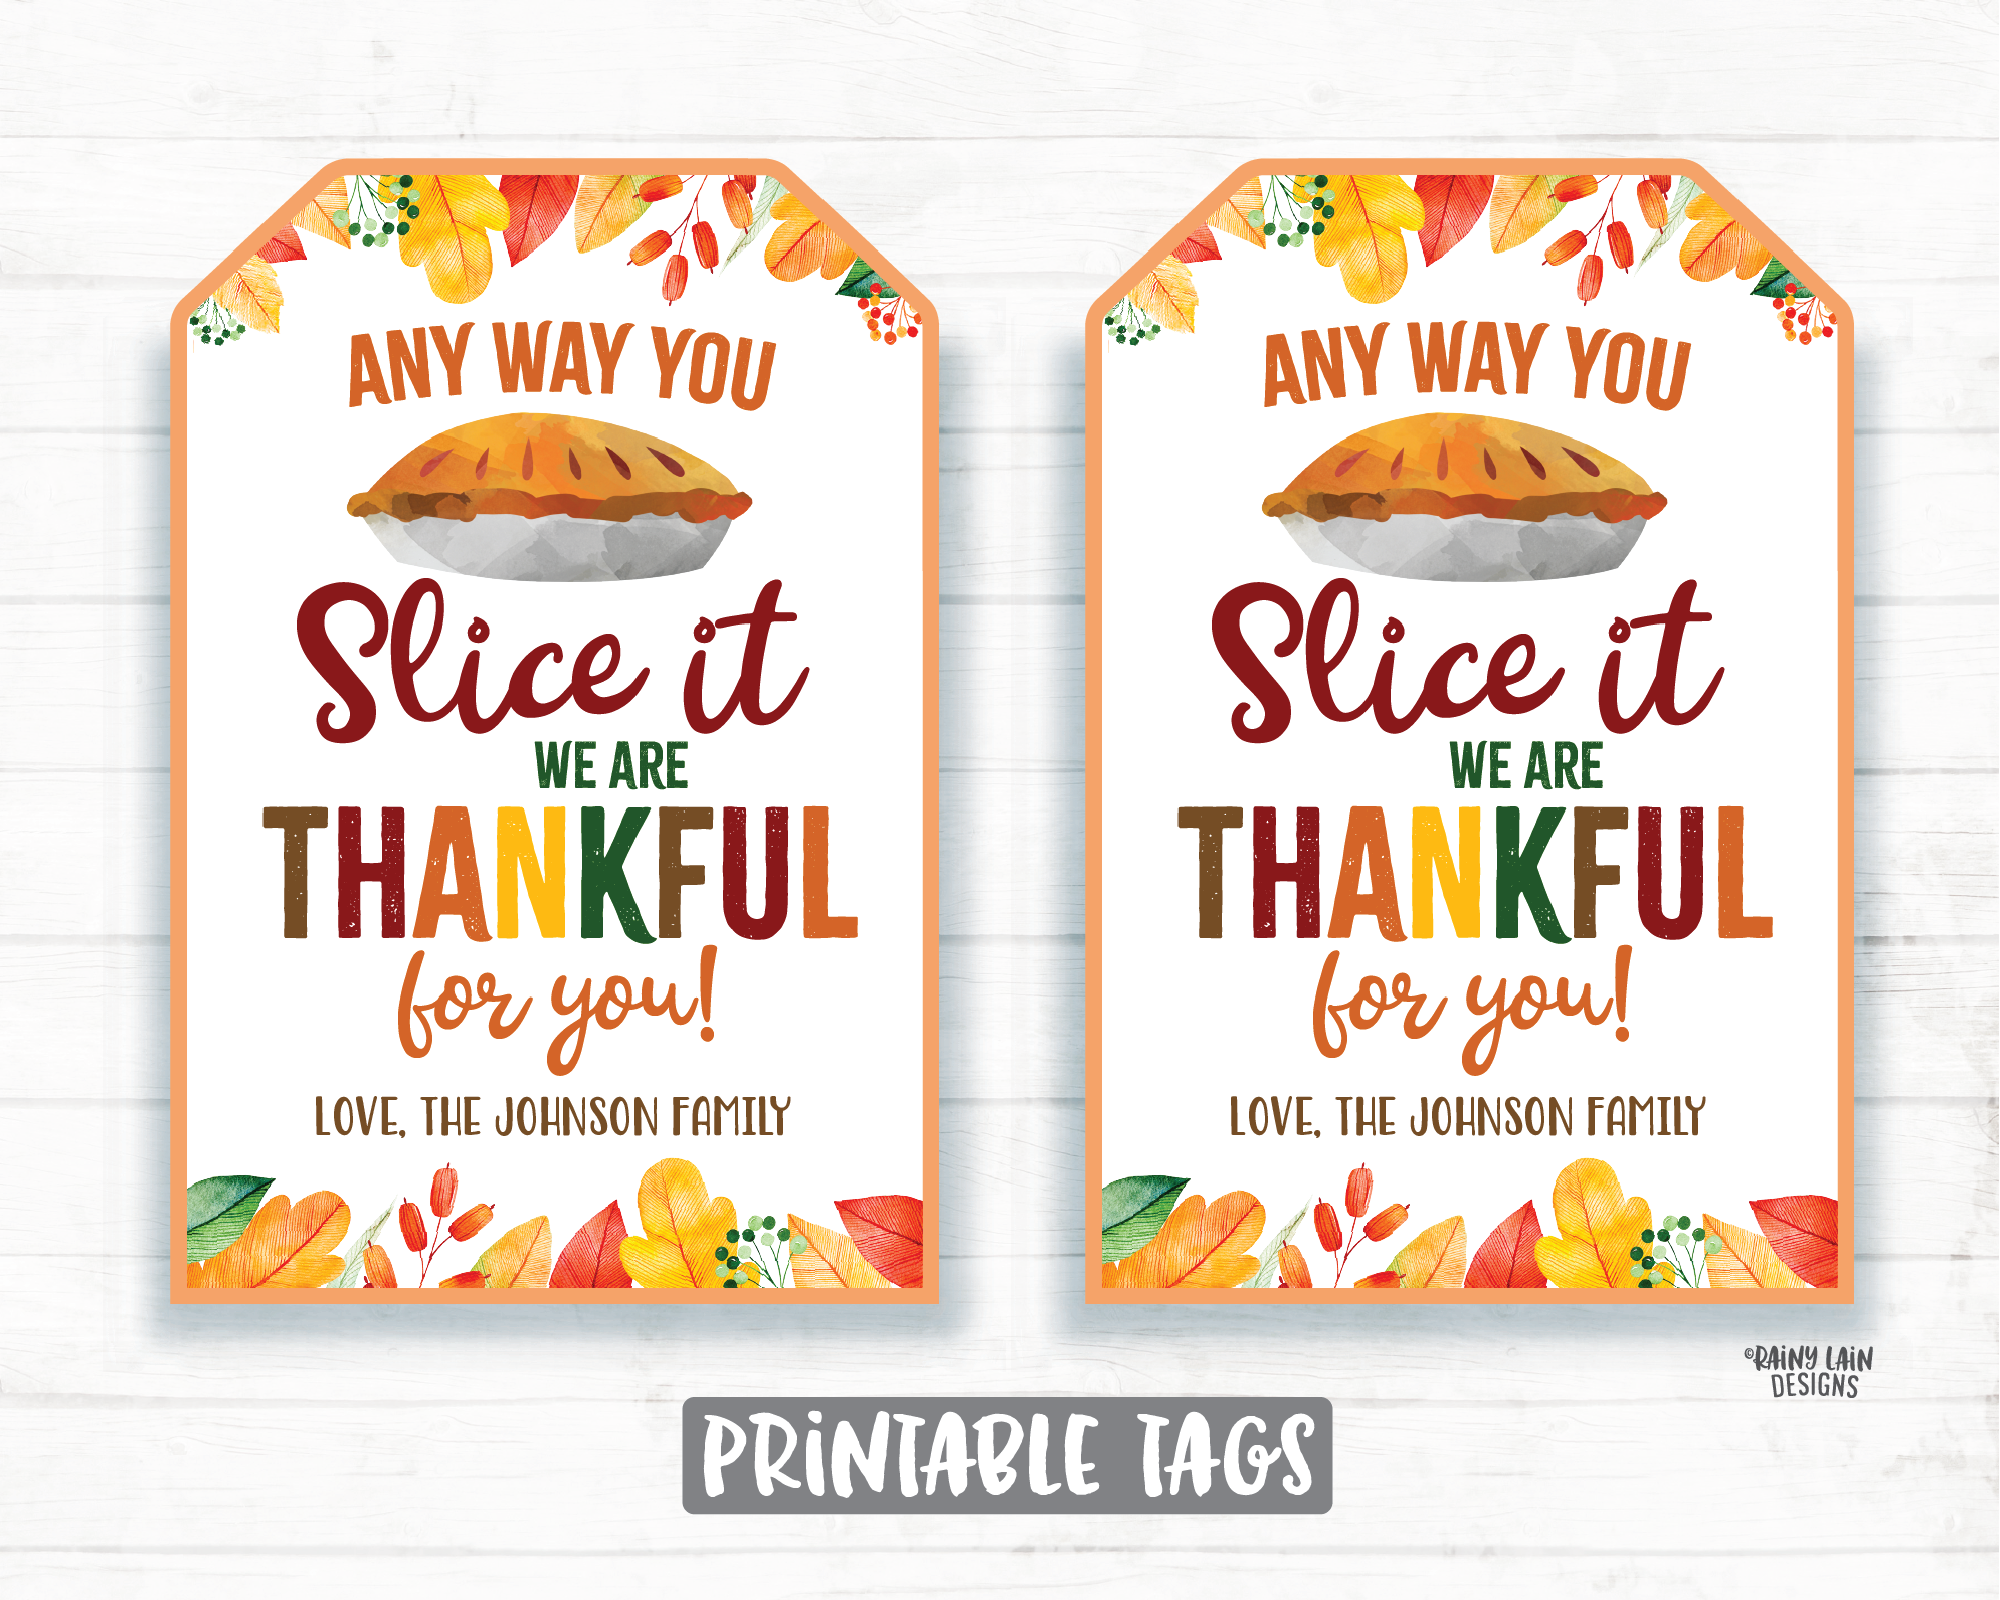 Any way you Slice it Appreciation Tags, Thankful Tags, Pie Thank You Tags, Pie Gift Tag Employee Company Co-Worker Staff Corporate Teacher Thanksgiving